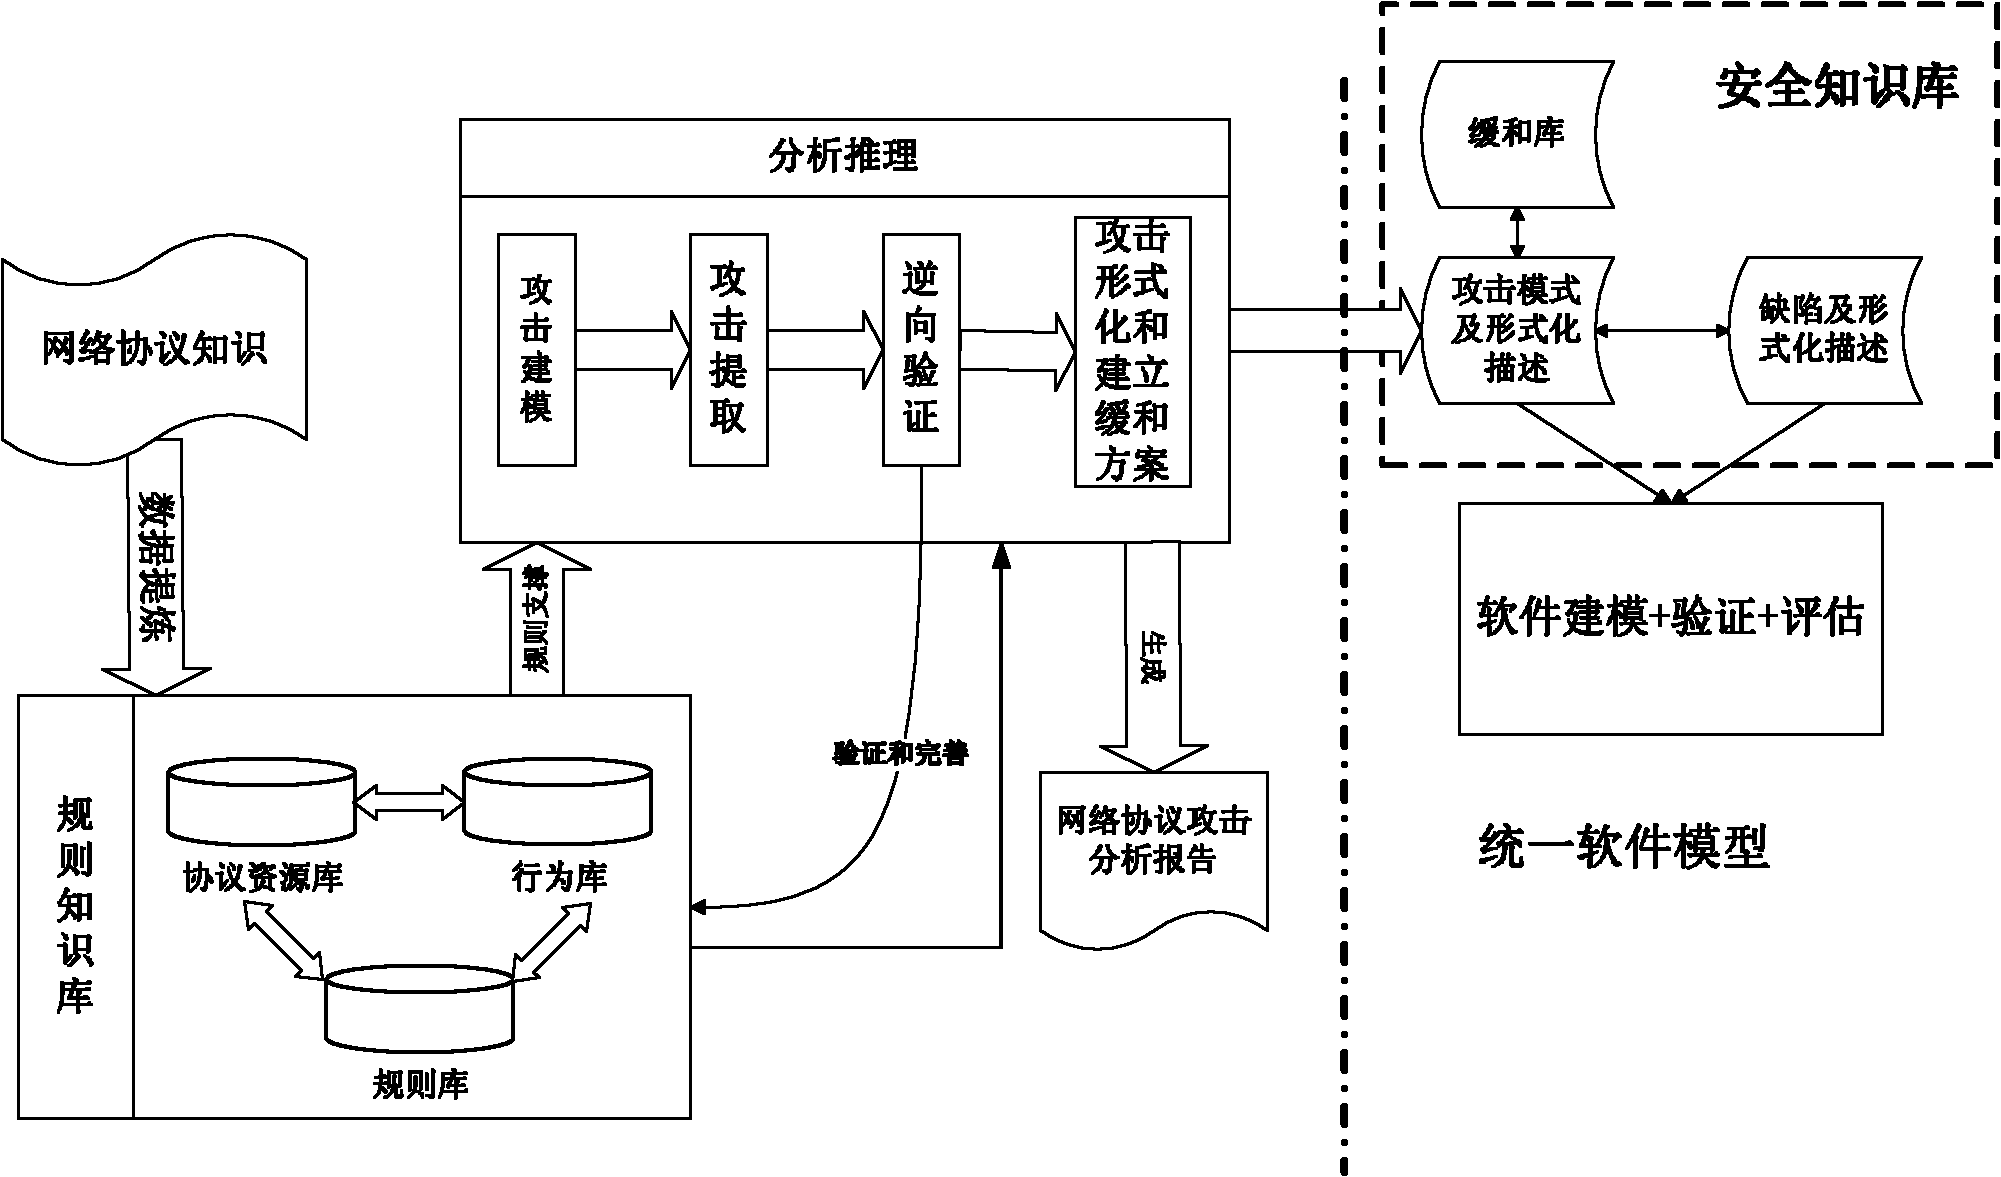 Method for analyzing safety defect of network protocol